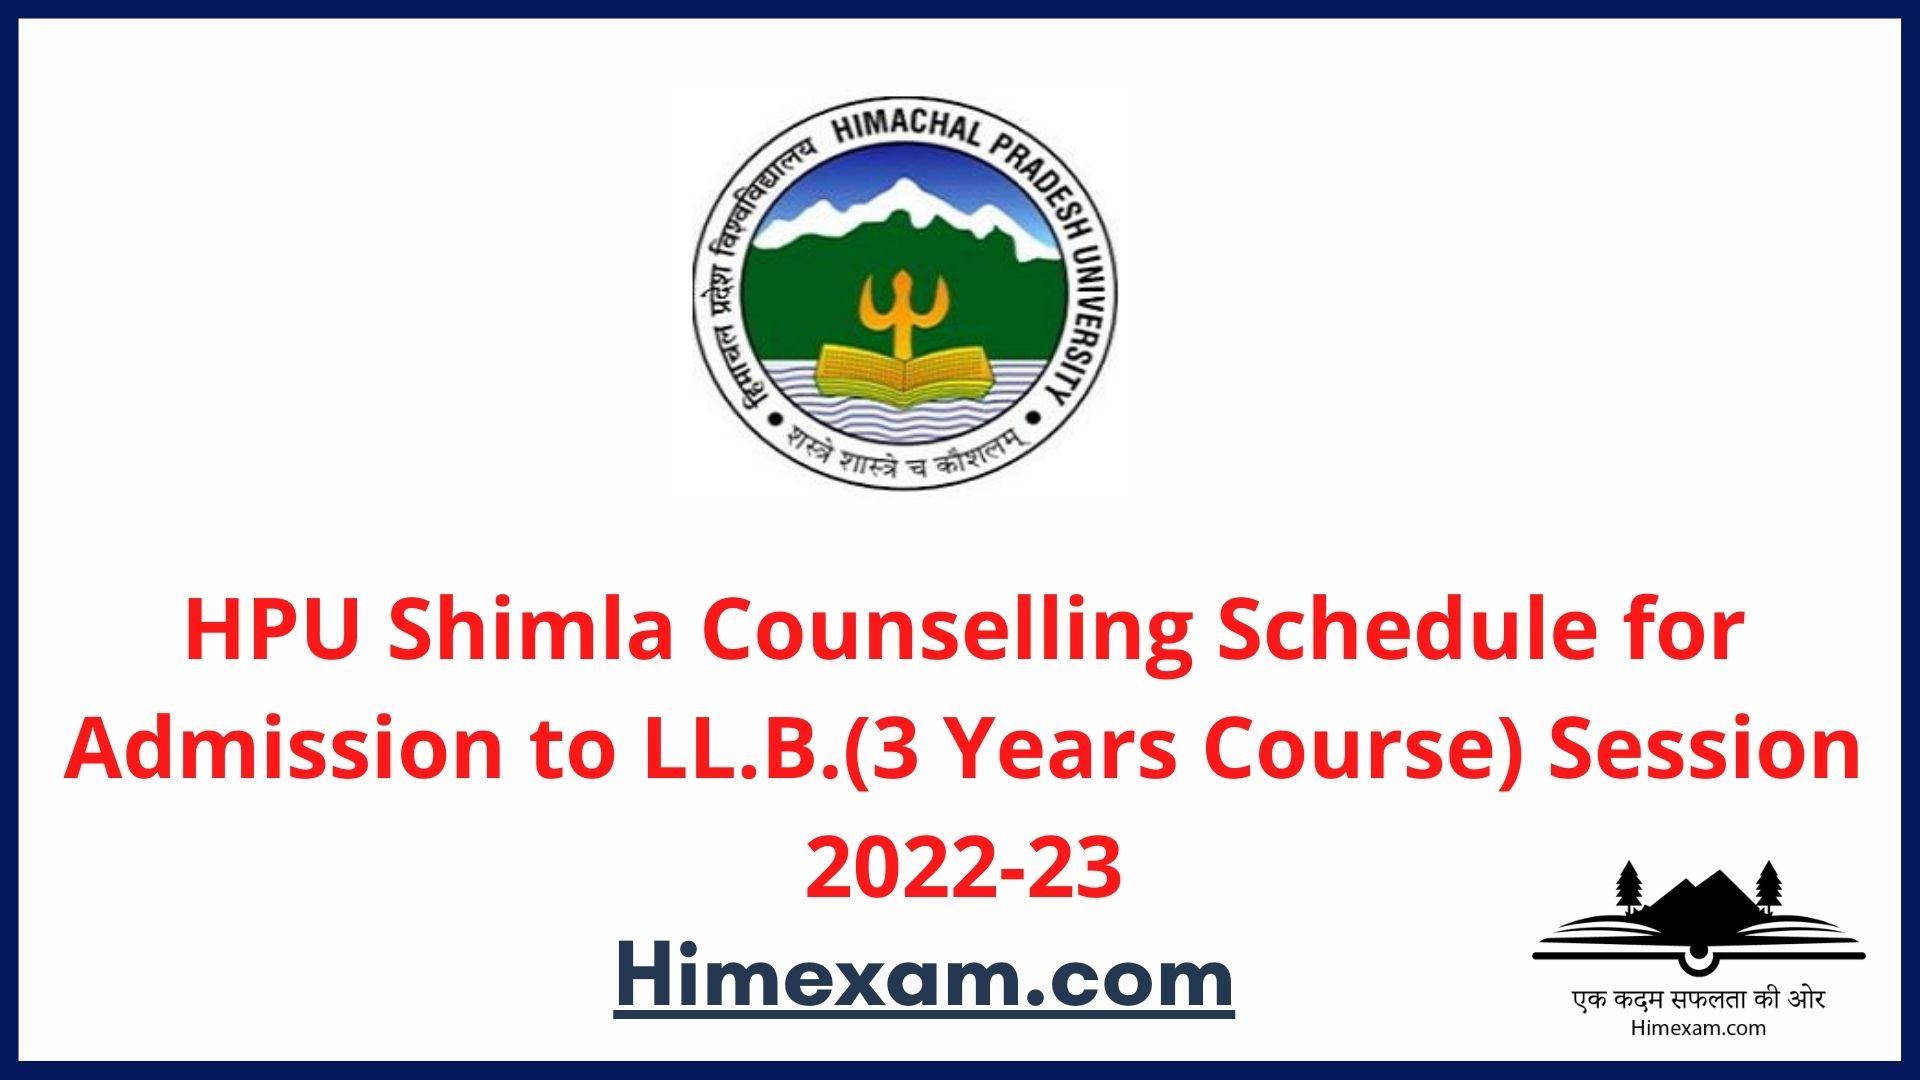 HPU Shimla Counselling Schedule for Admission to LL.B.(3 Years Course) Session 2022-23